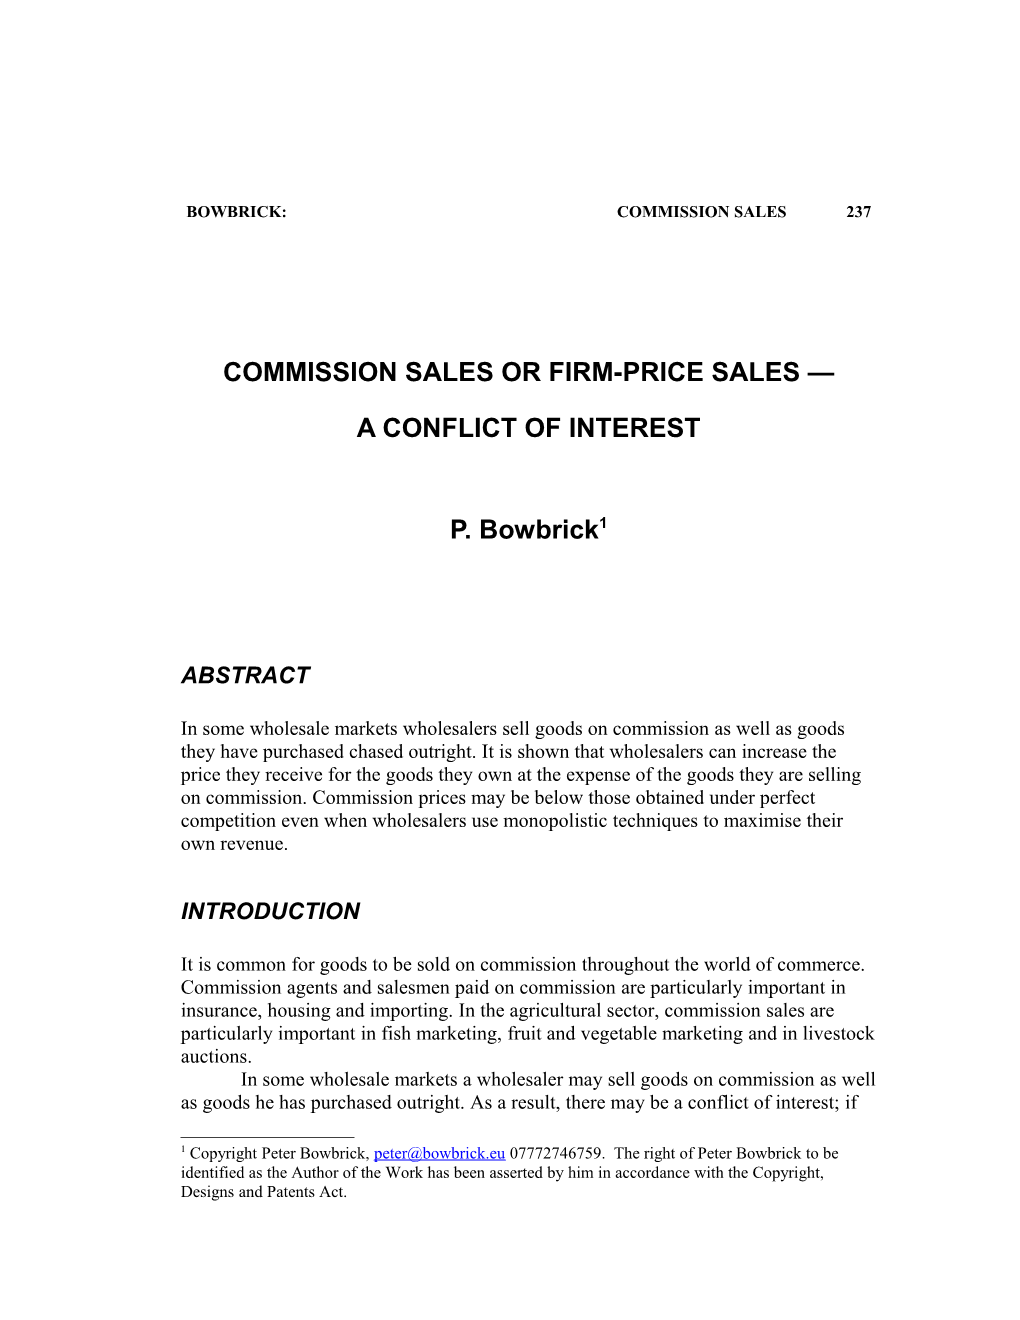 Commission Sales Or Firm-Price Sales